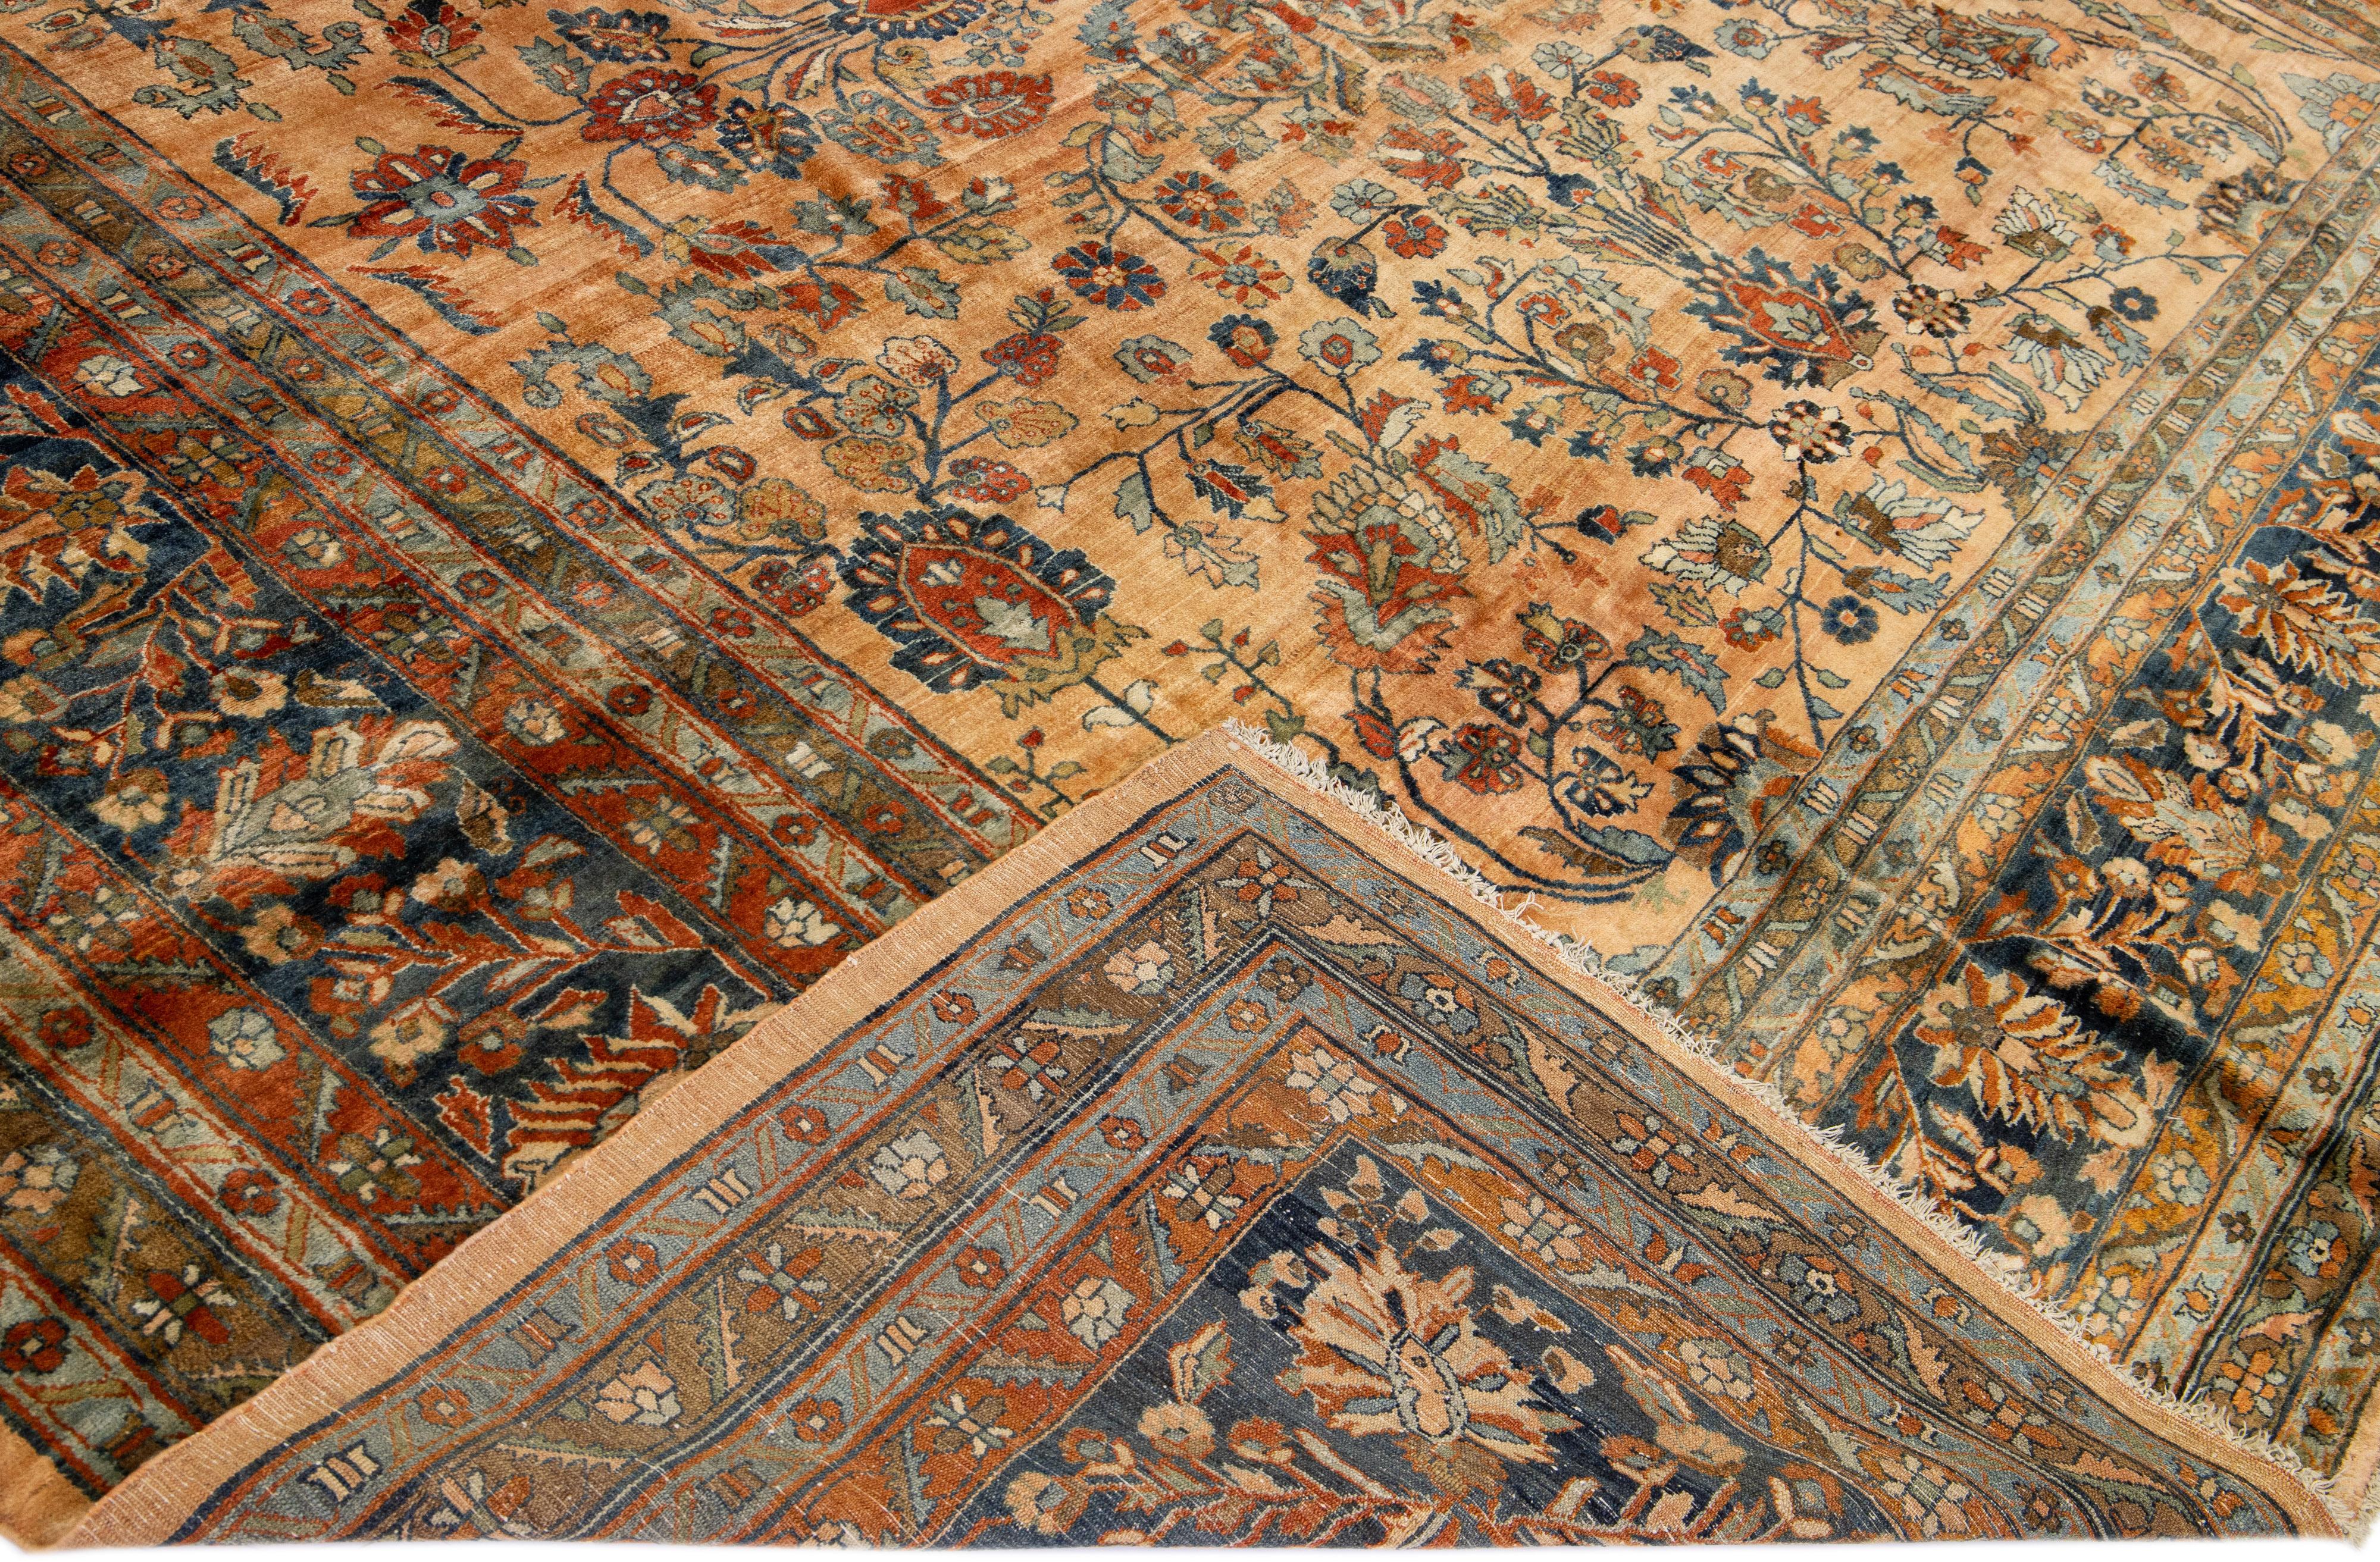 Beautiful antique Lilihan hand-knotted wool with a peach field. This Persian has blue borders with an all-over floral pattern design in blue and red accents. 

This rug measures: 13' x 20'6